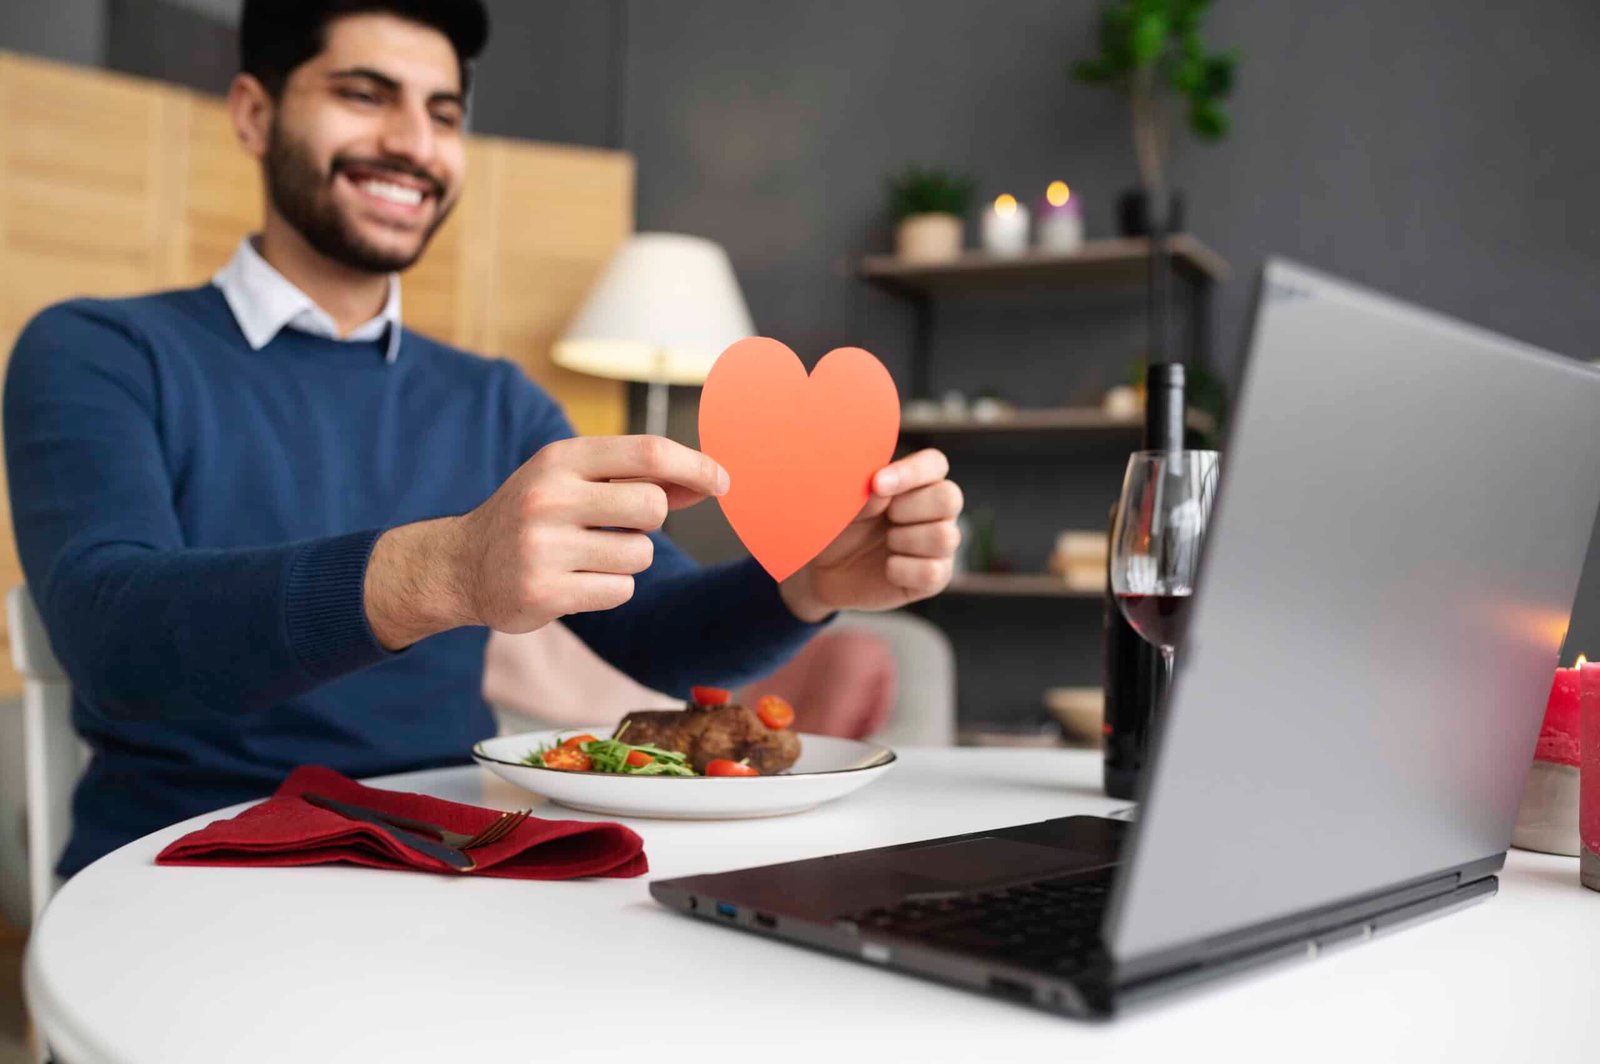 Online Dating for Meaningful Connections